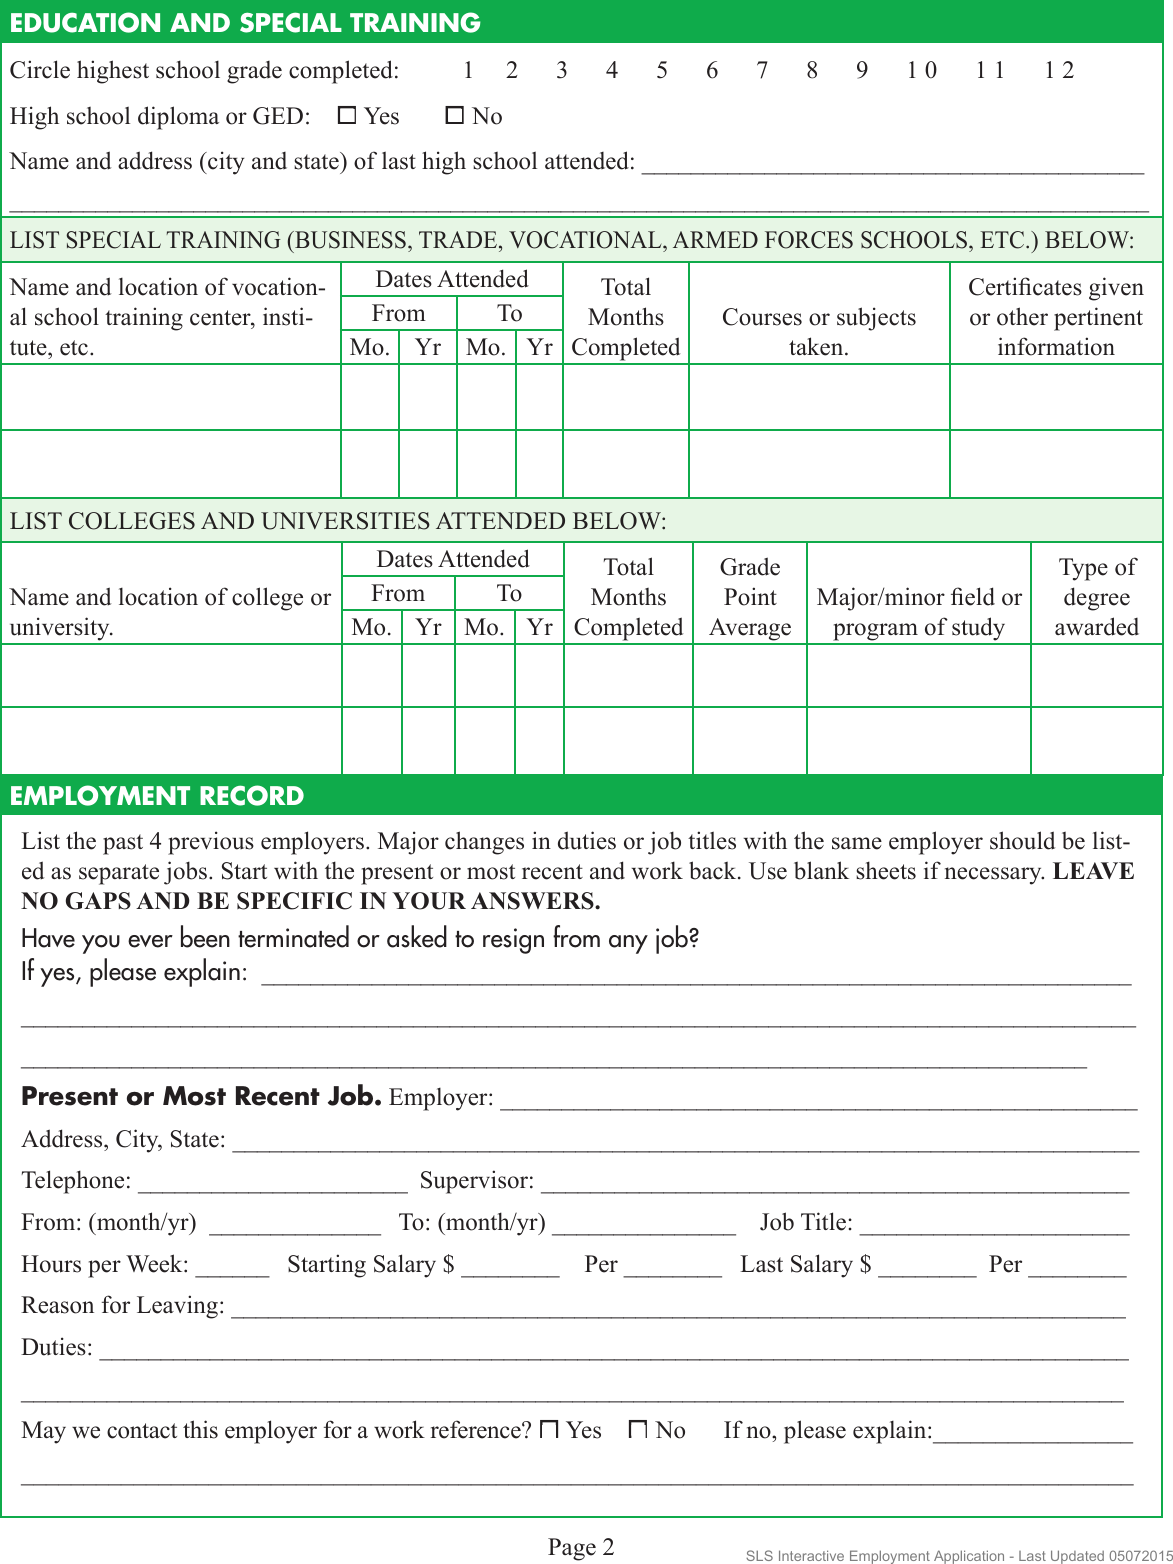 Page 2 of 4 - Sunlight Supply-Interactive-Employment-Application